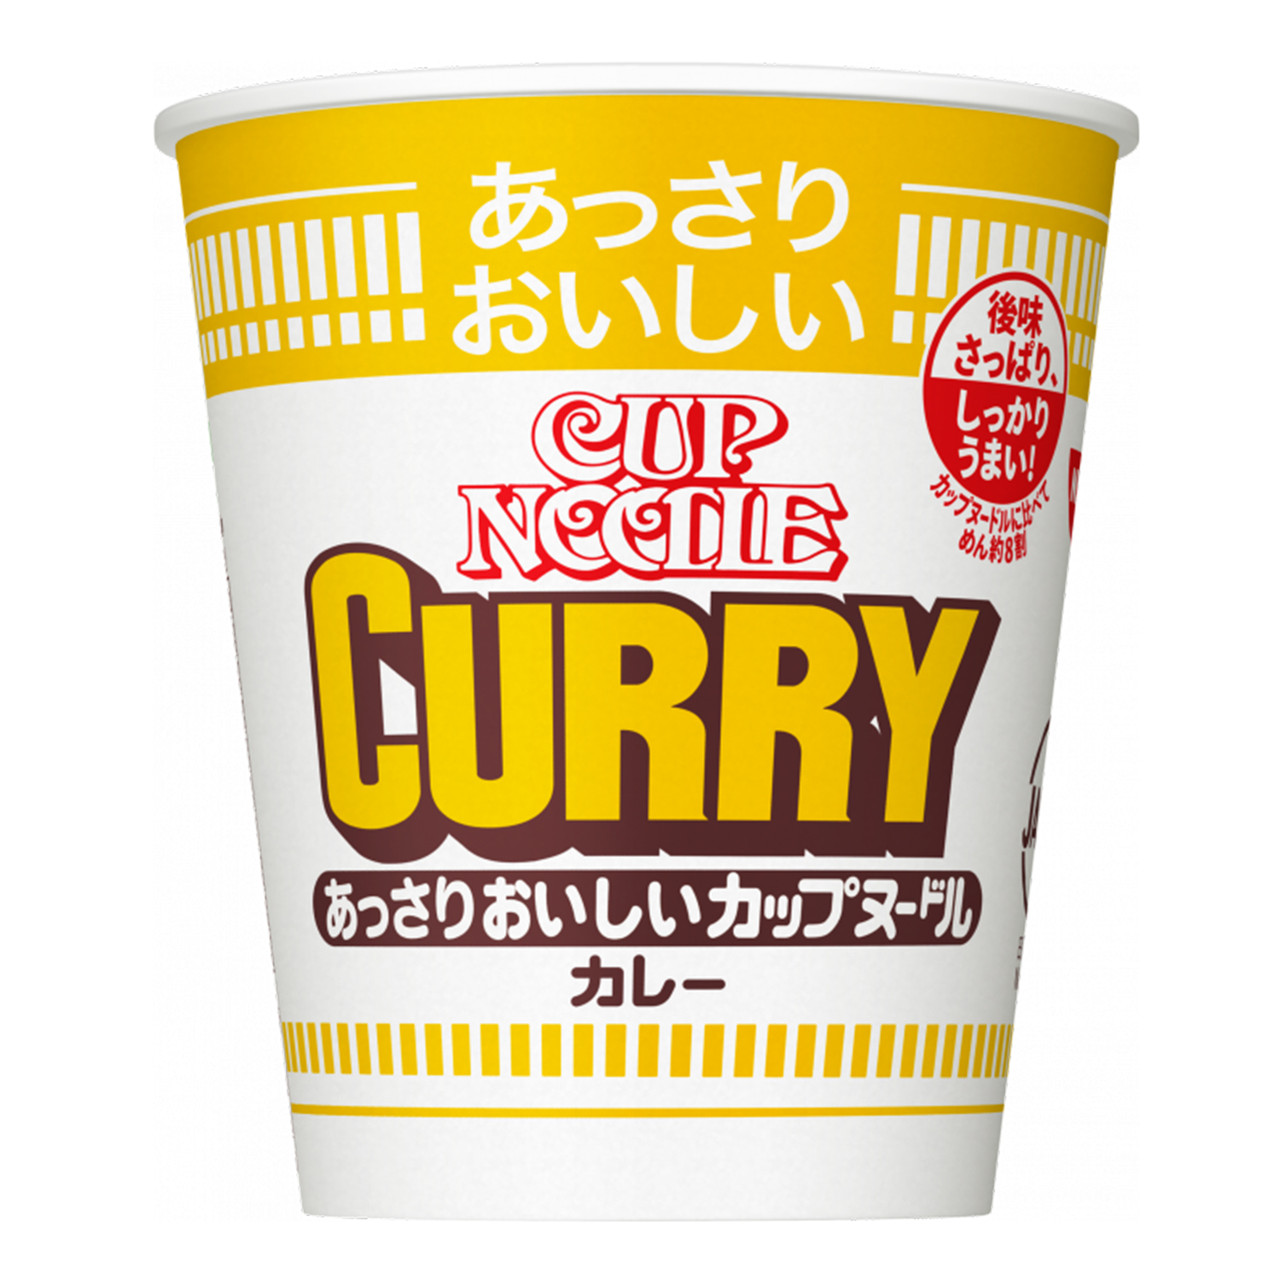 Лапша Cup Noodle Curry Карри 70 г. - фото 1 - id-p1817455363